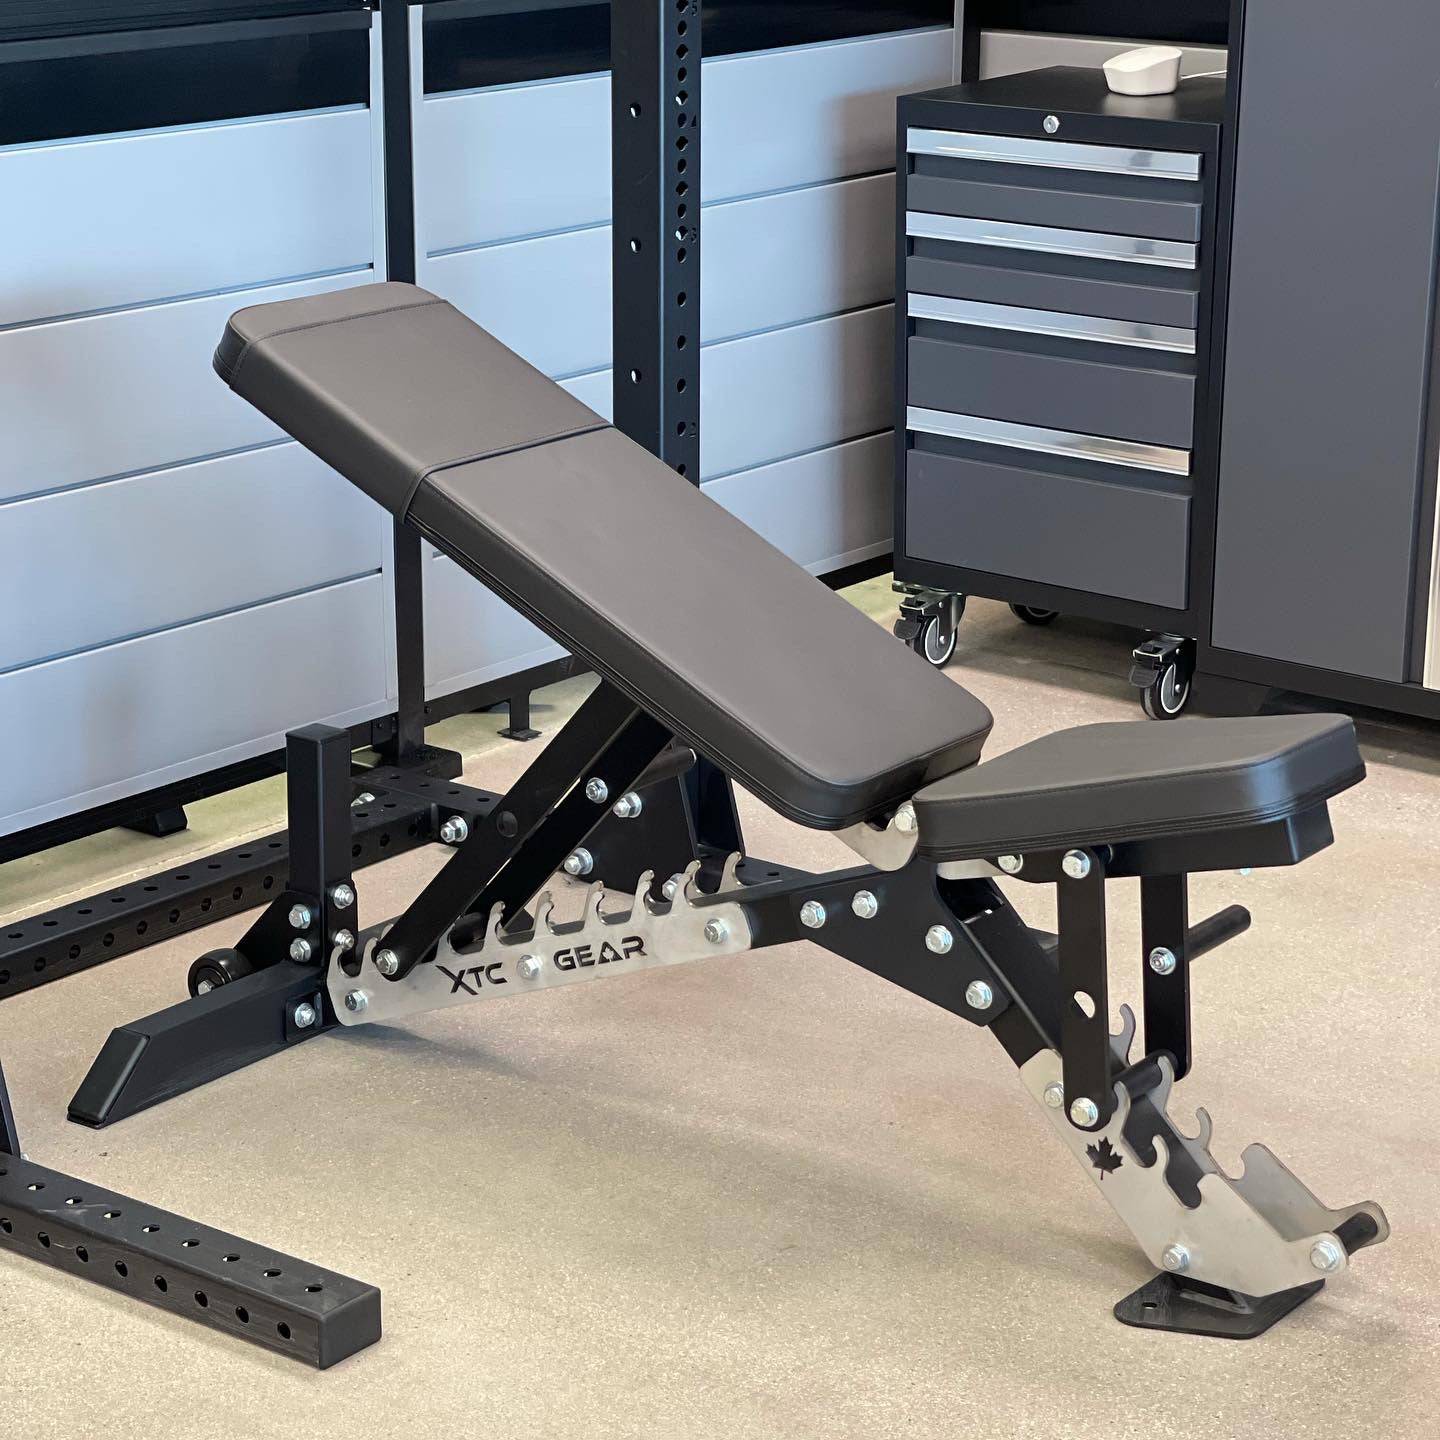 XTC Gear | X-Series Super Bench - XTC Fitness - Exercise Equipment Superstore - Canada - Adjustable Bench FI